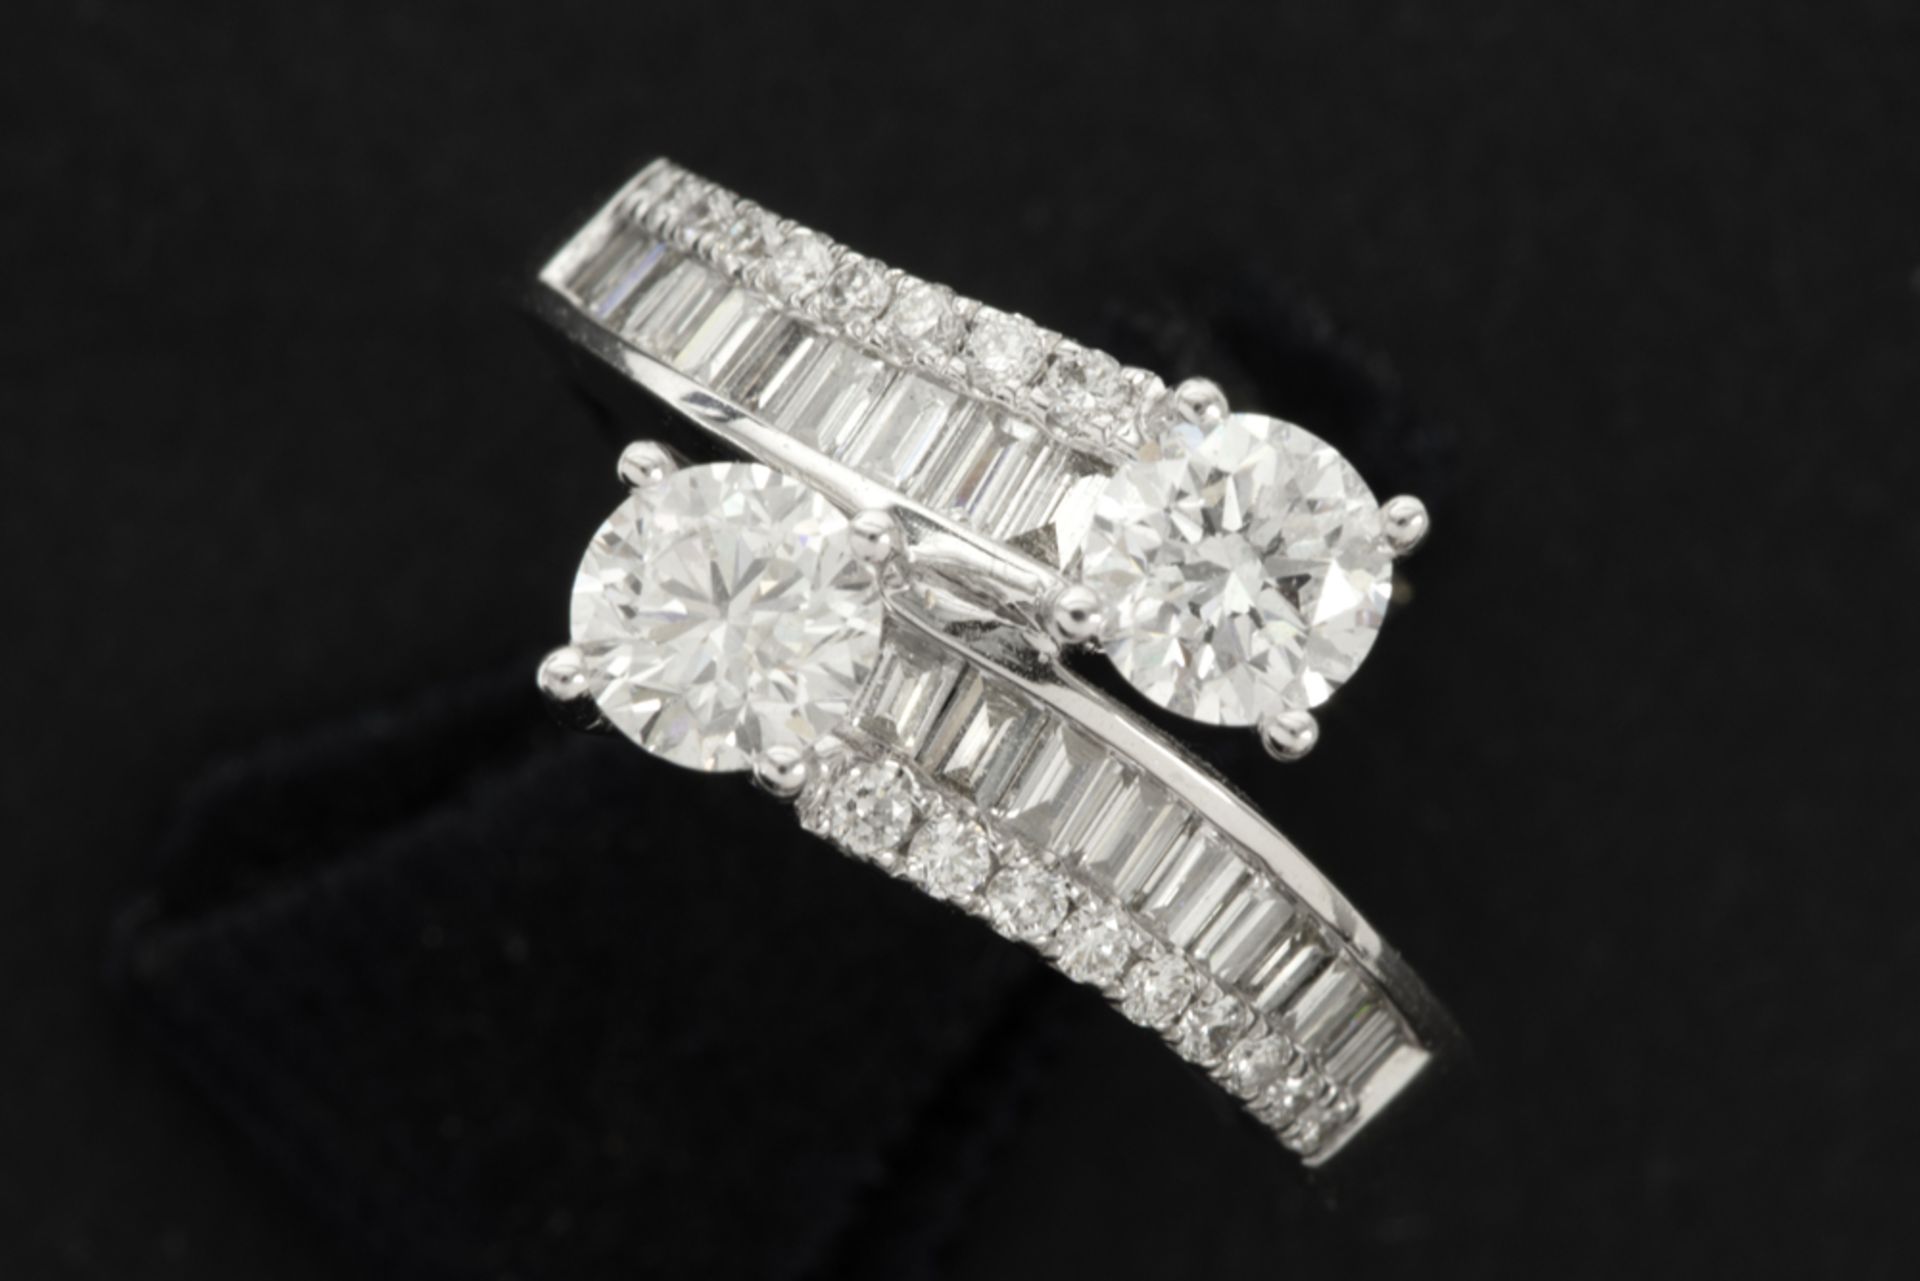 ring in white gold (18 carat) with two bigger brilliants (1,05 carat) and 0,70 carat of small high